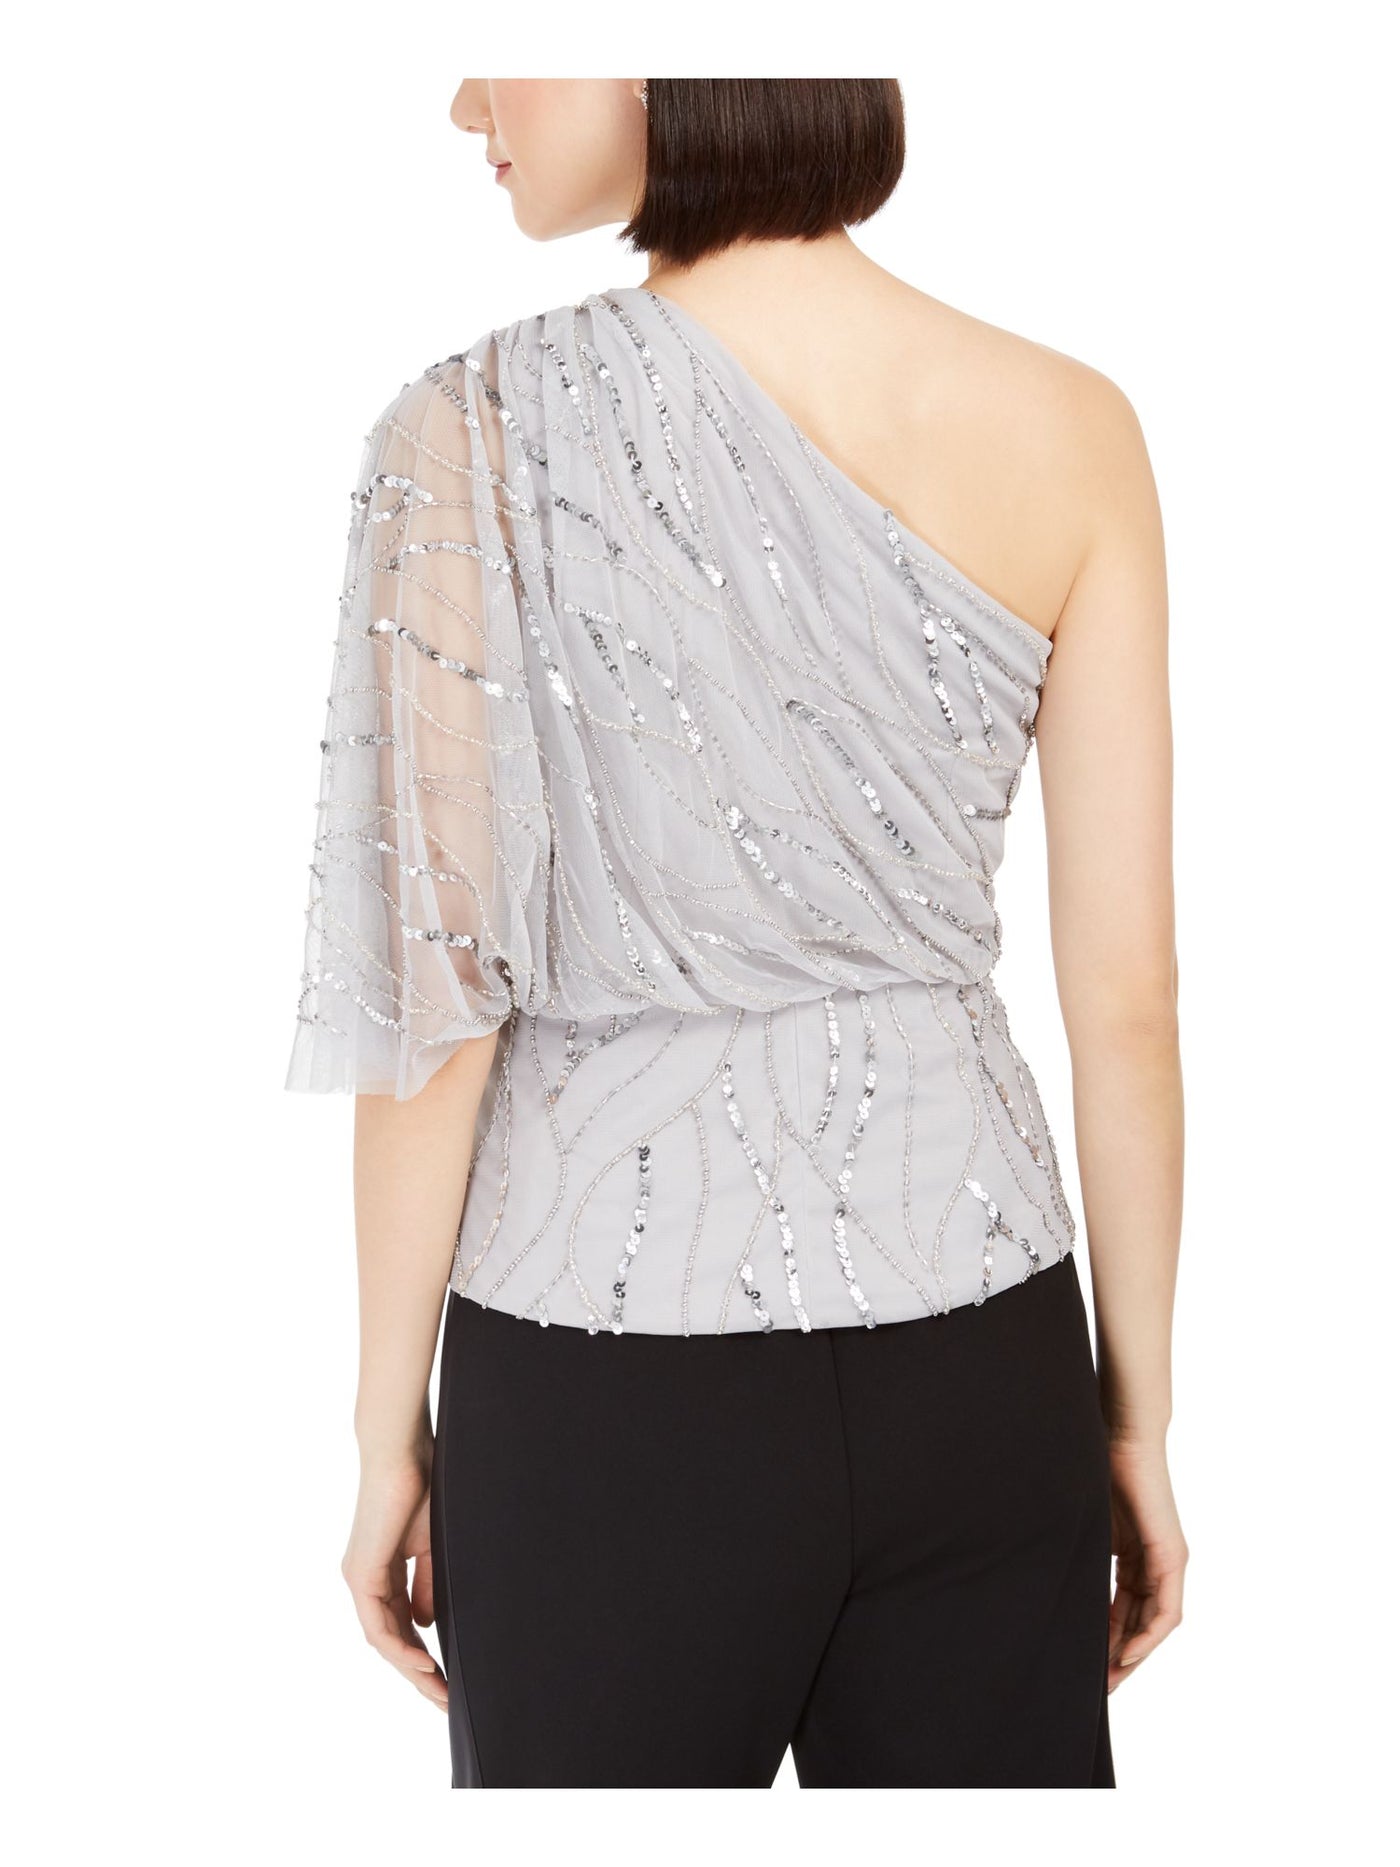 ADRIANNA PAPELL Womens Silver Sequined Sheer Patterned Sleeveless Asymmetrical Neckline Evening Top 4P